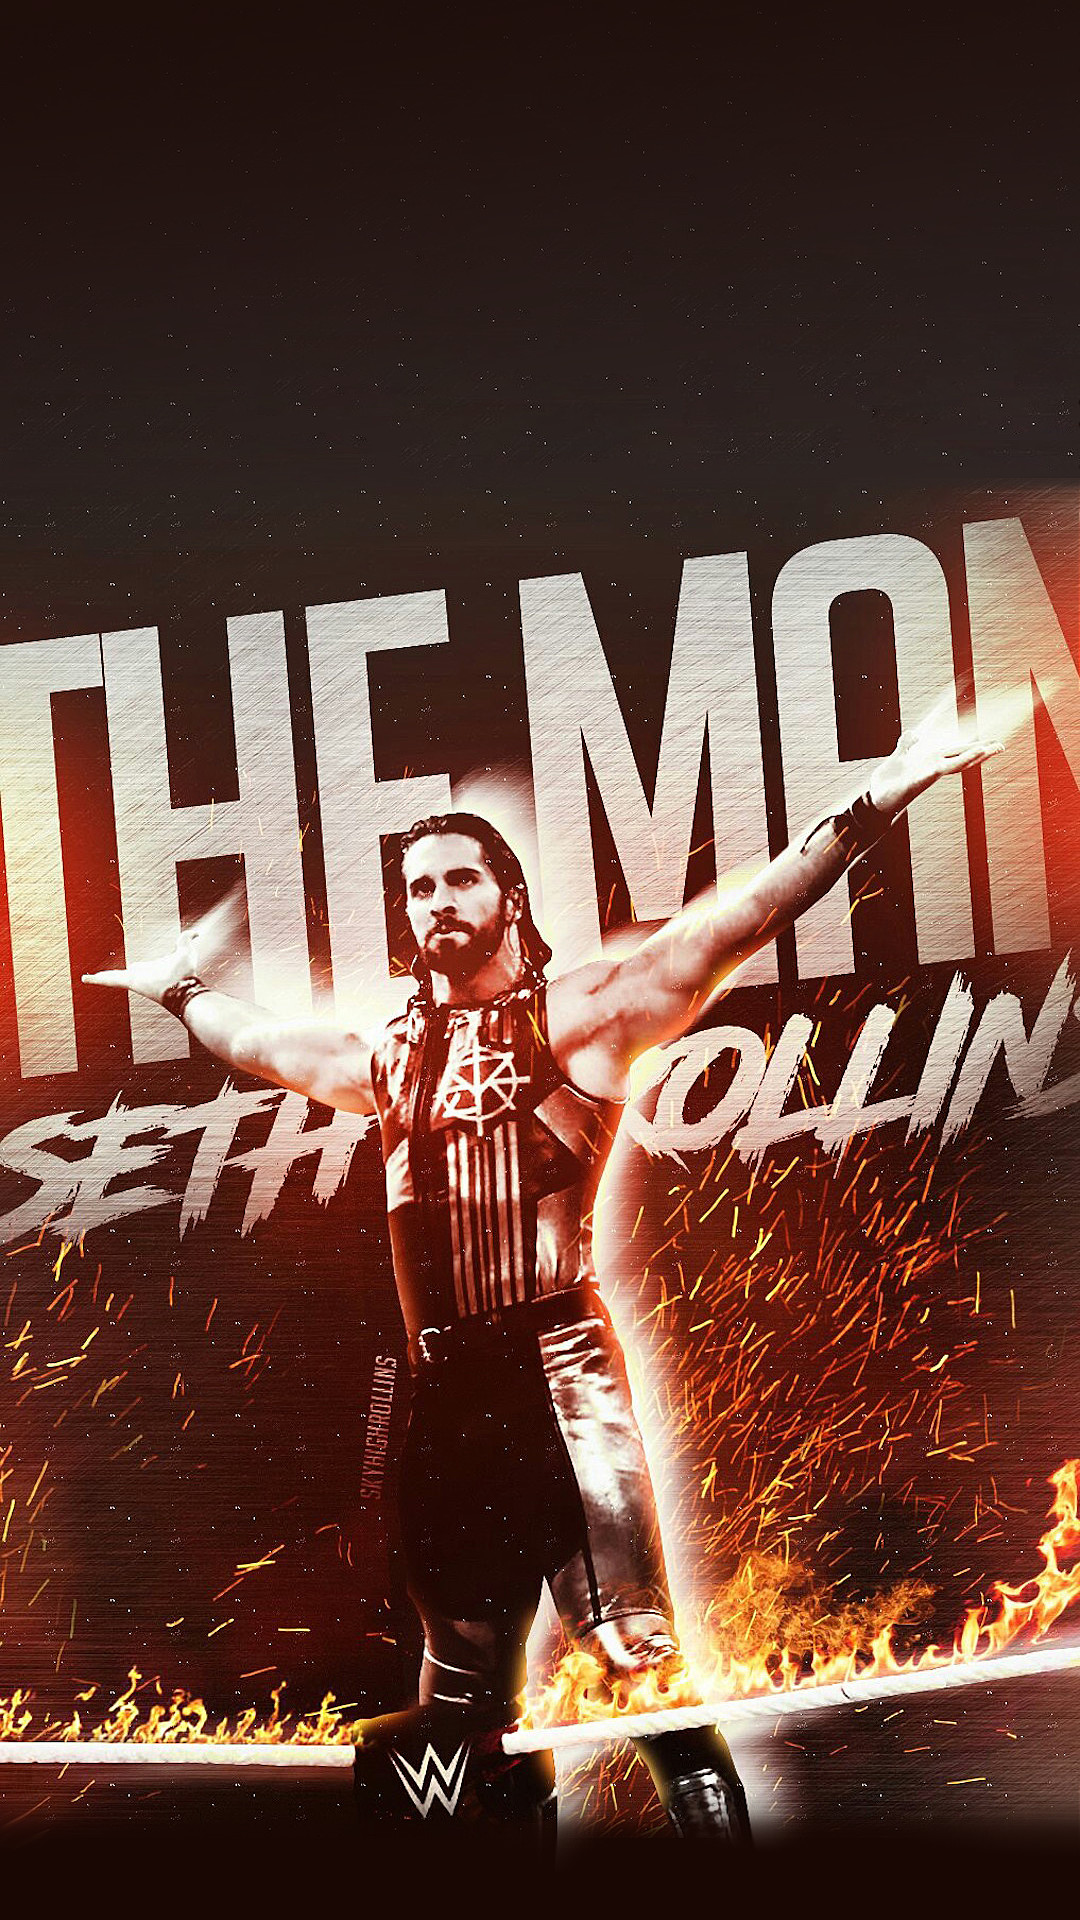 Seth Rollins Wallpapers 85 Pictures